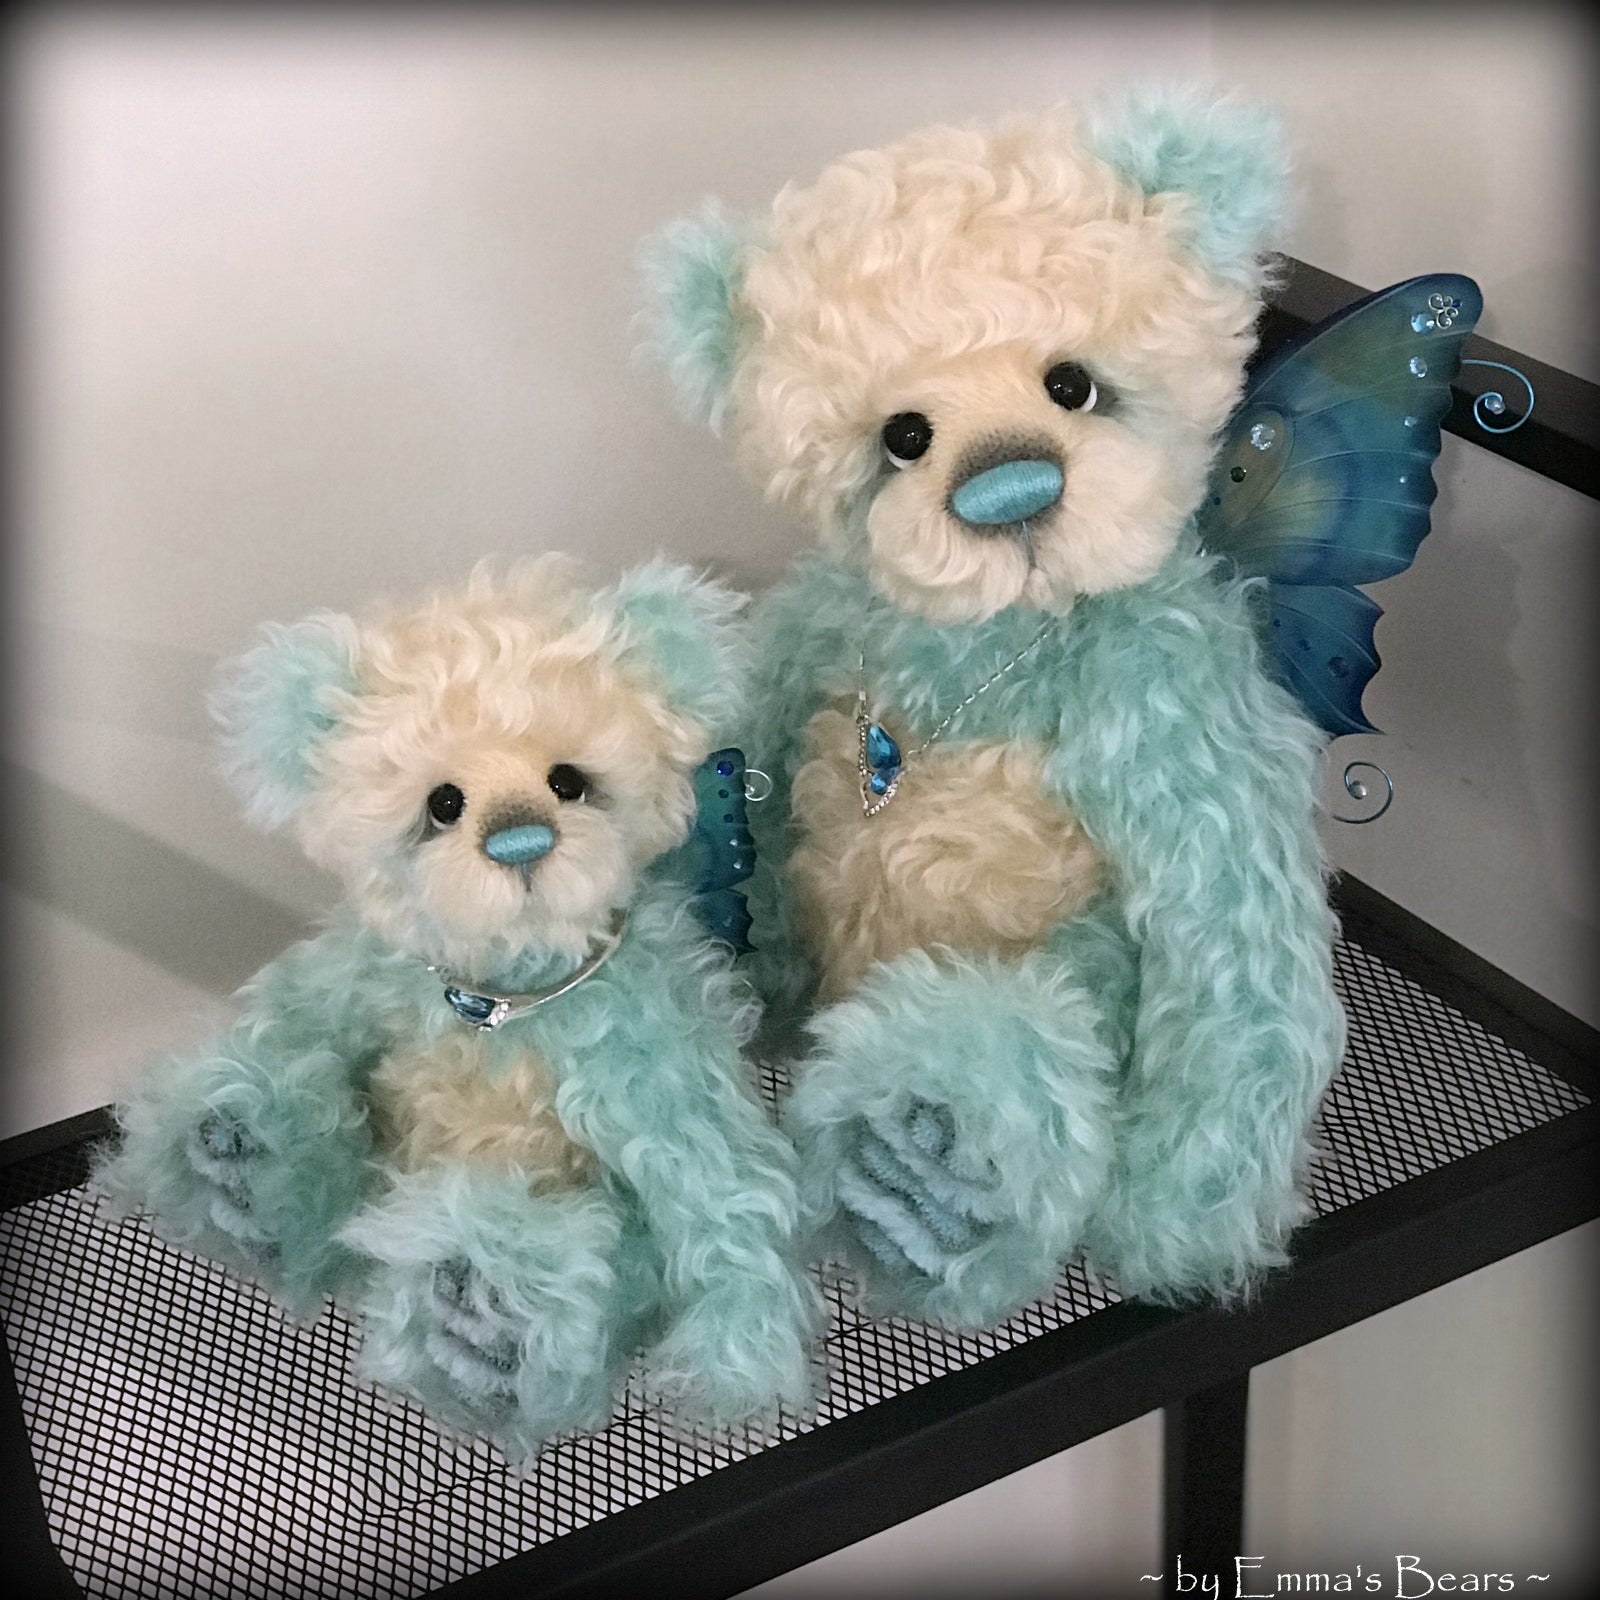 Waverly - 13" Hand dyed turquoise Butterfly Bear by Emma's Bears - OOAK